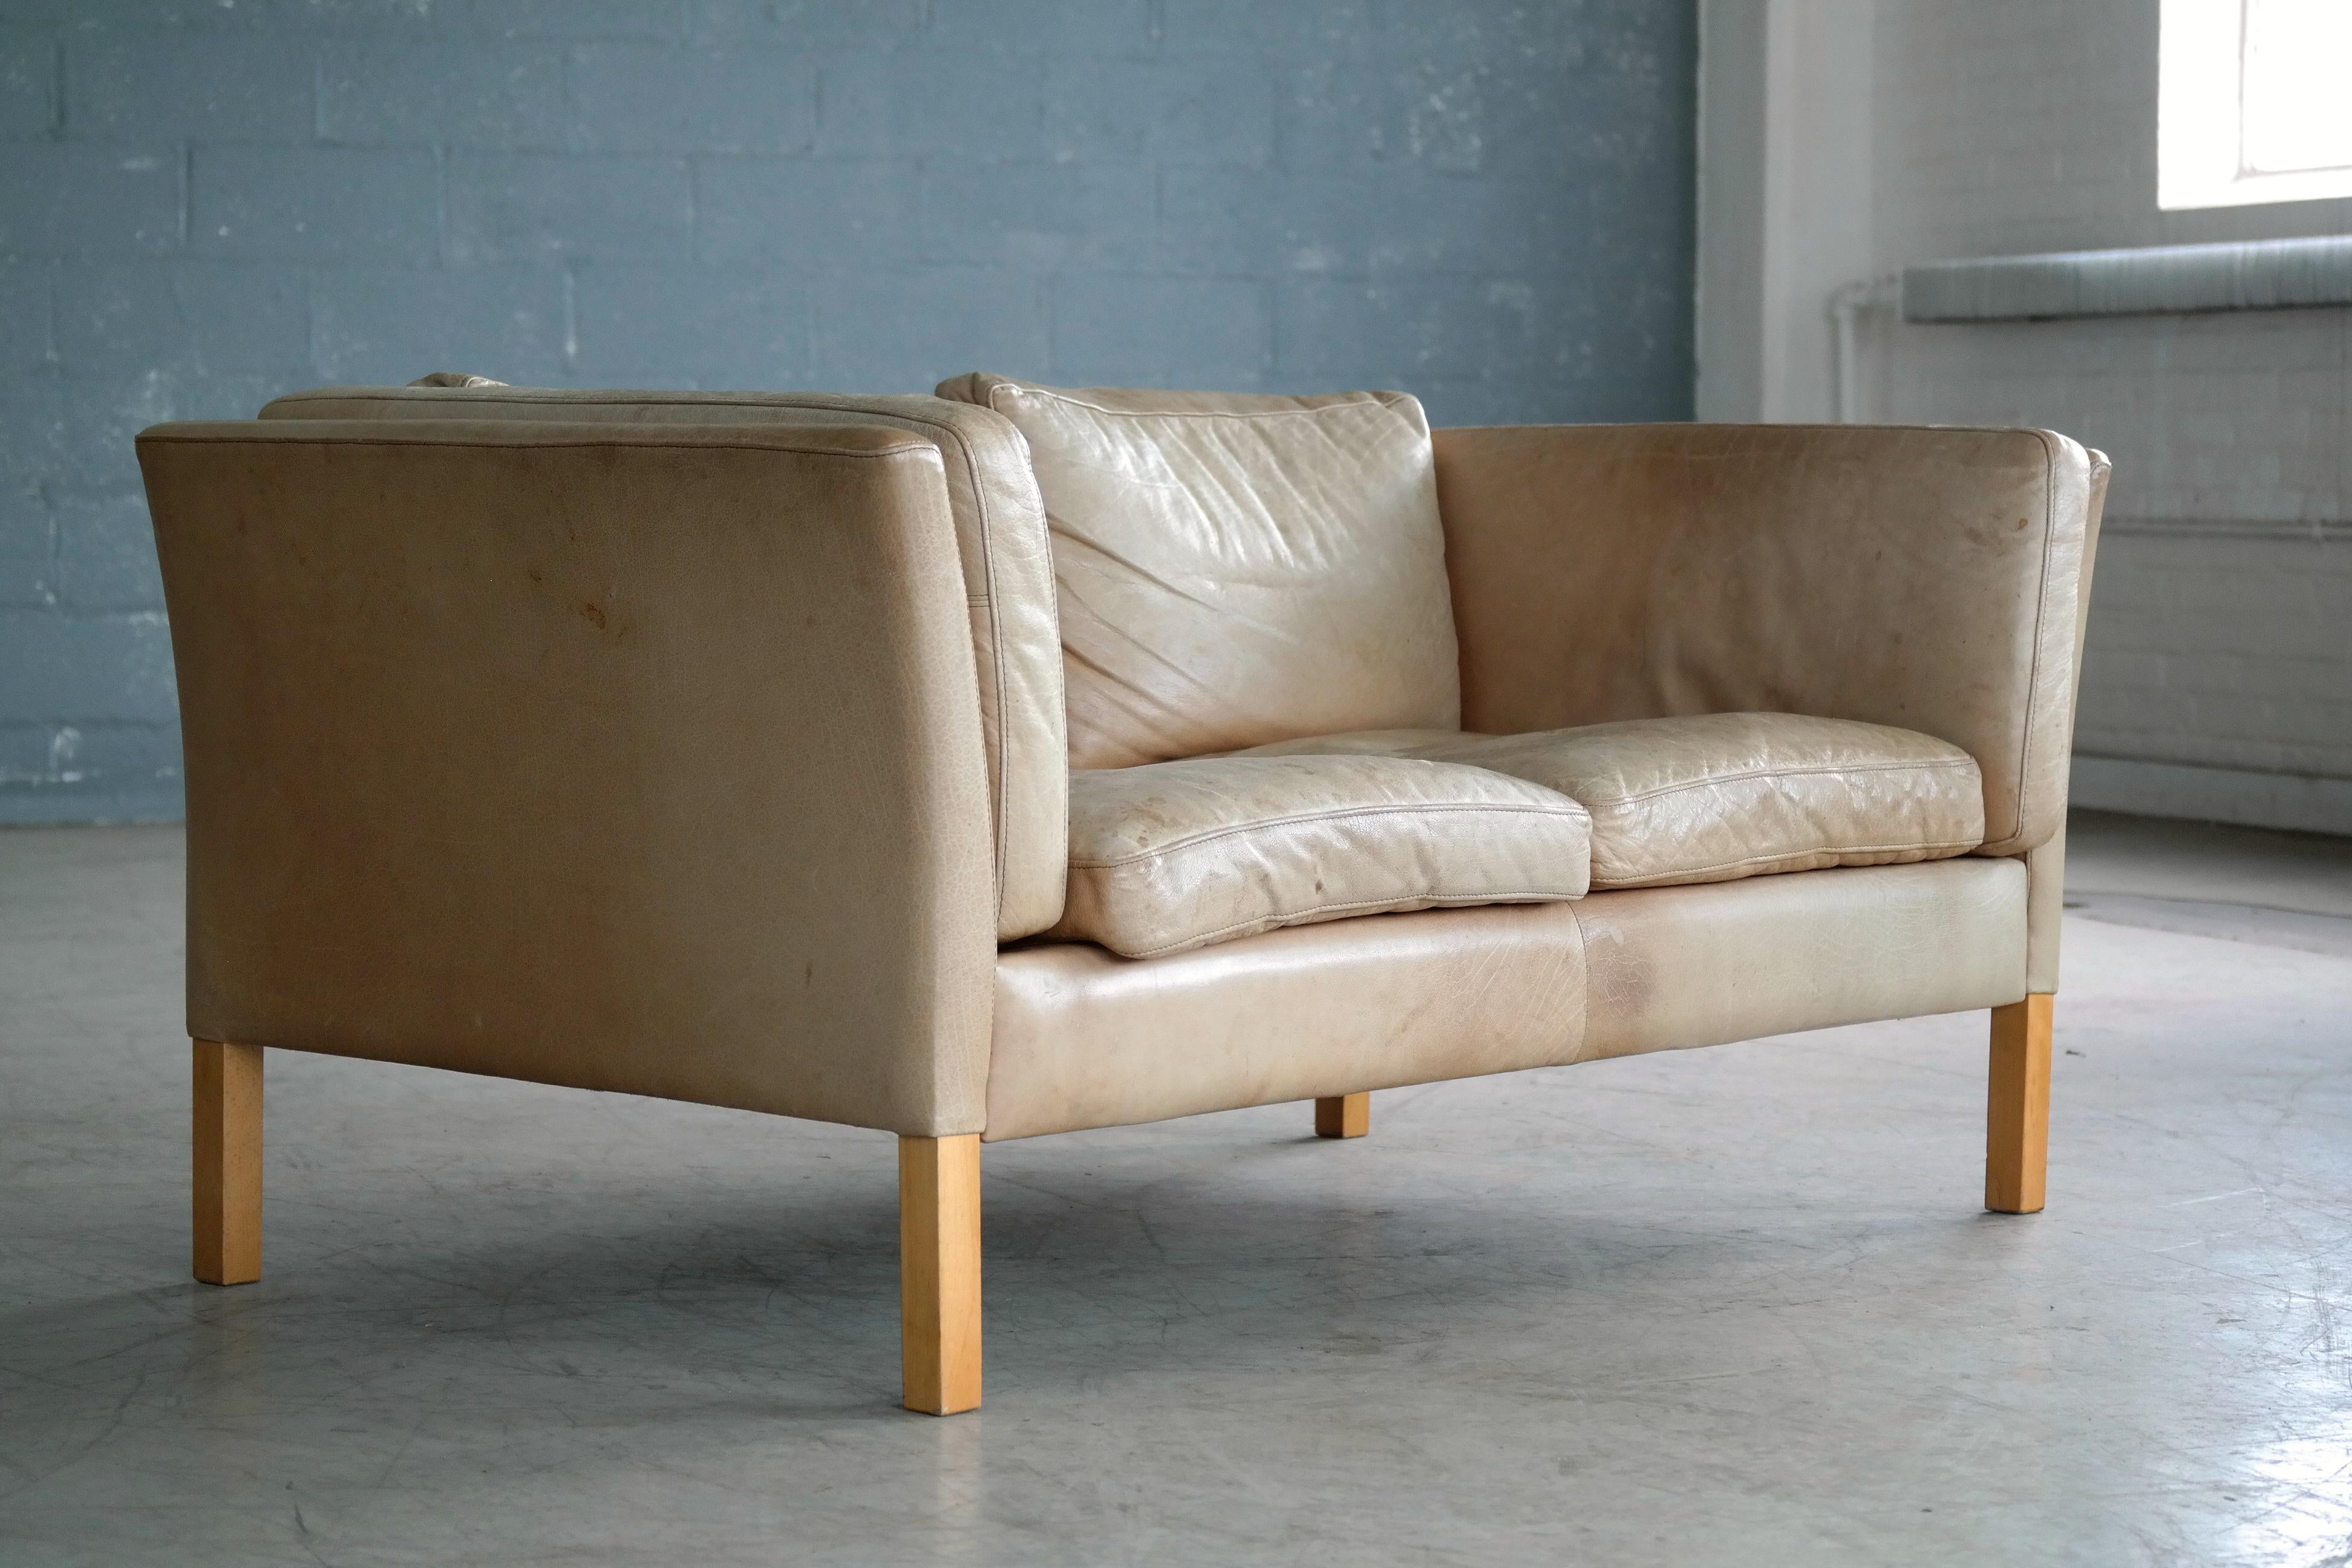 Late 20th Century Borge Mogensen Style Two-Seat Sofa in Tan Patinated Leather by Stouby